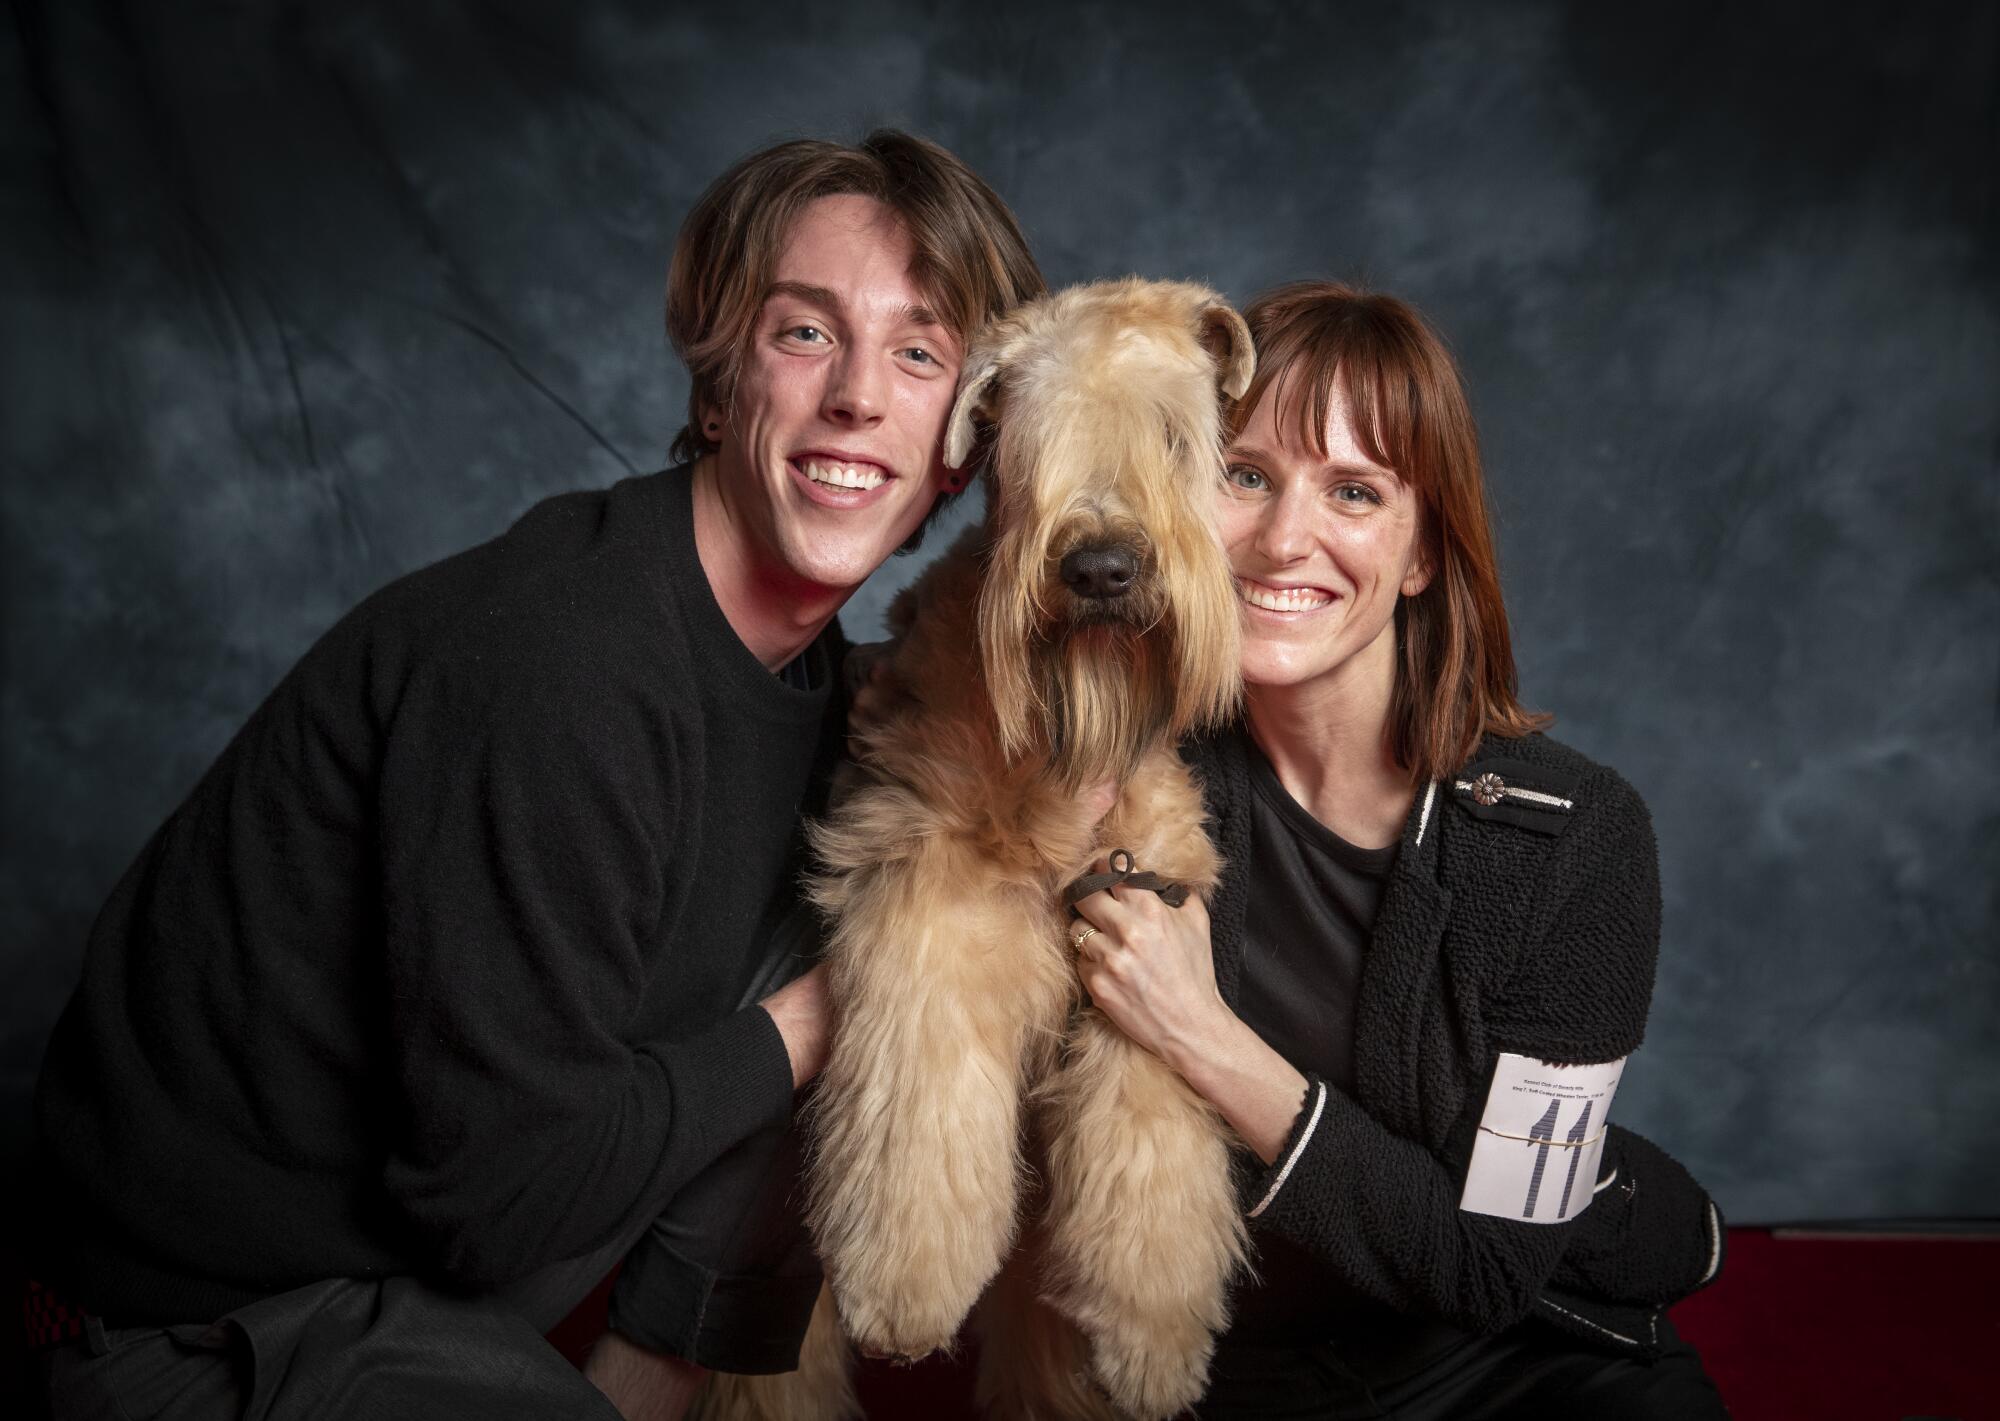  Daniel Faber, 24, and sister Brittany Faber, 31, of Los Angeles, pose with Neville, a 13-month-old, 35-lb soft-coated wheaten terrier. 